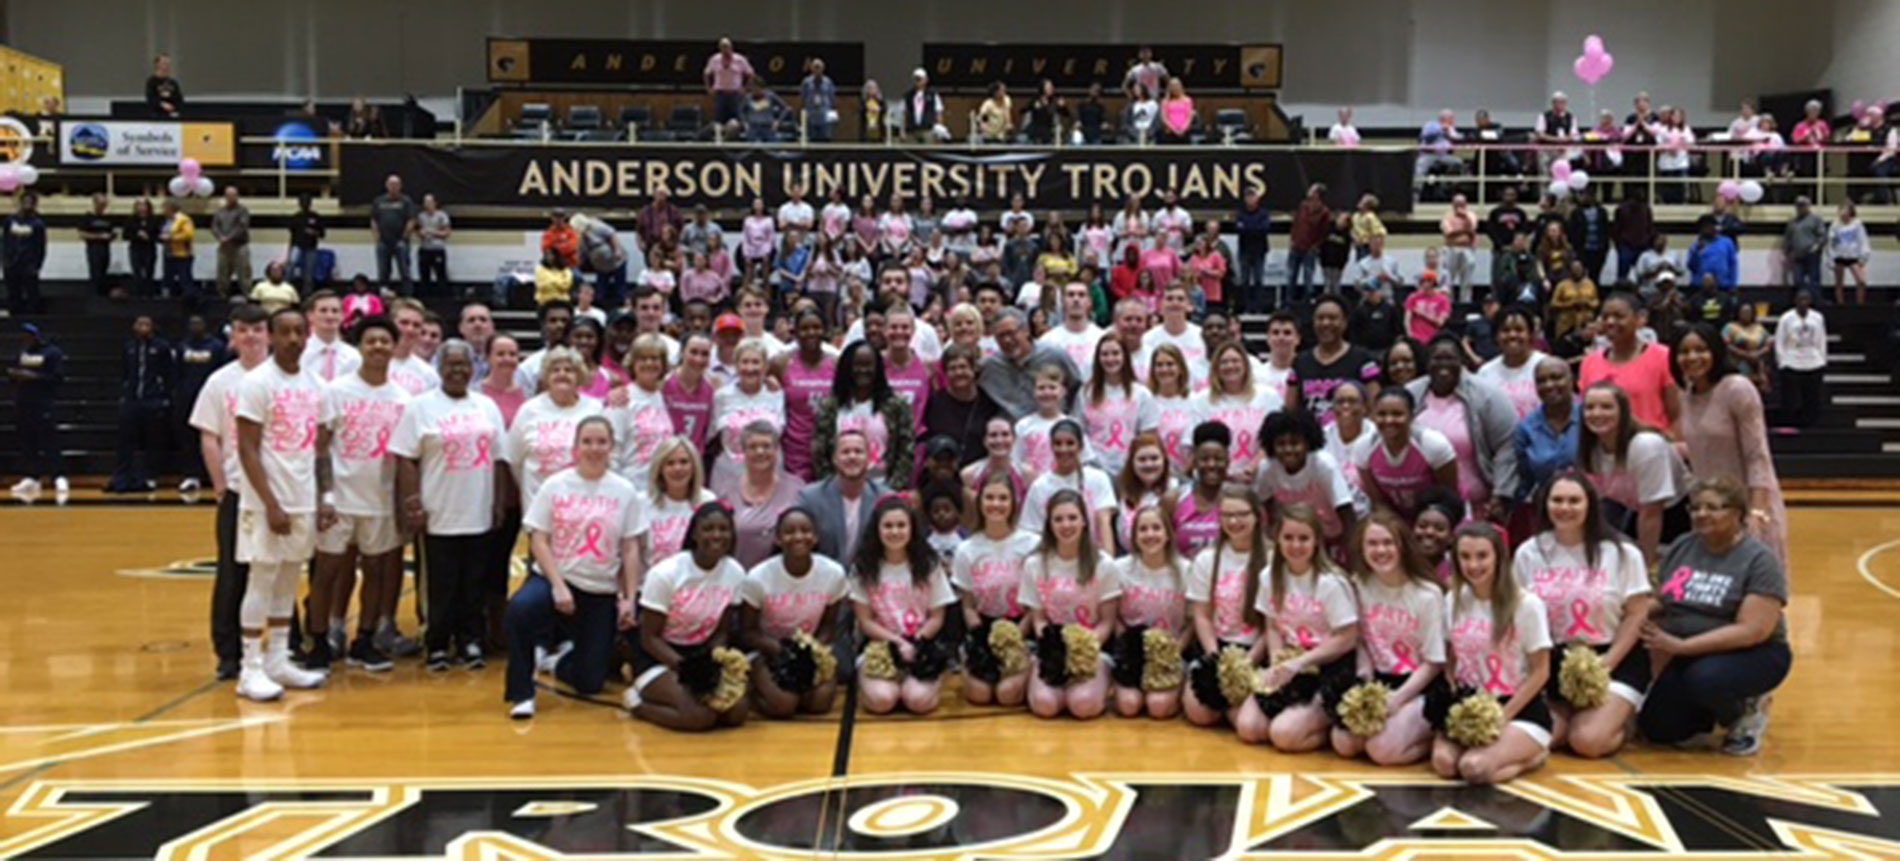 18th Ranked Trojans Clinch SAC Regular Season Title with Win over Coker; 93-48